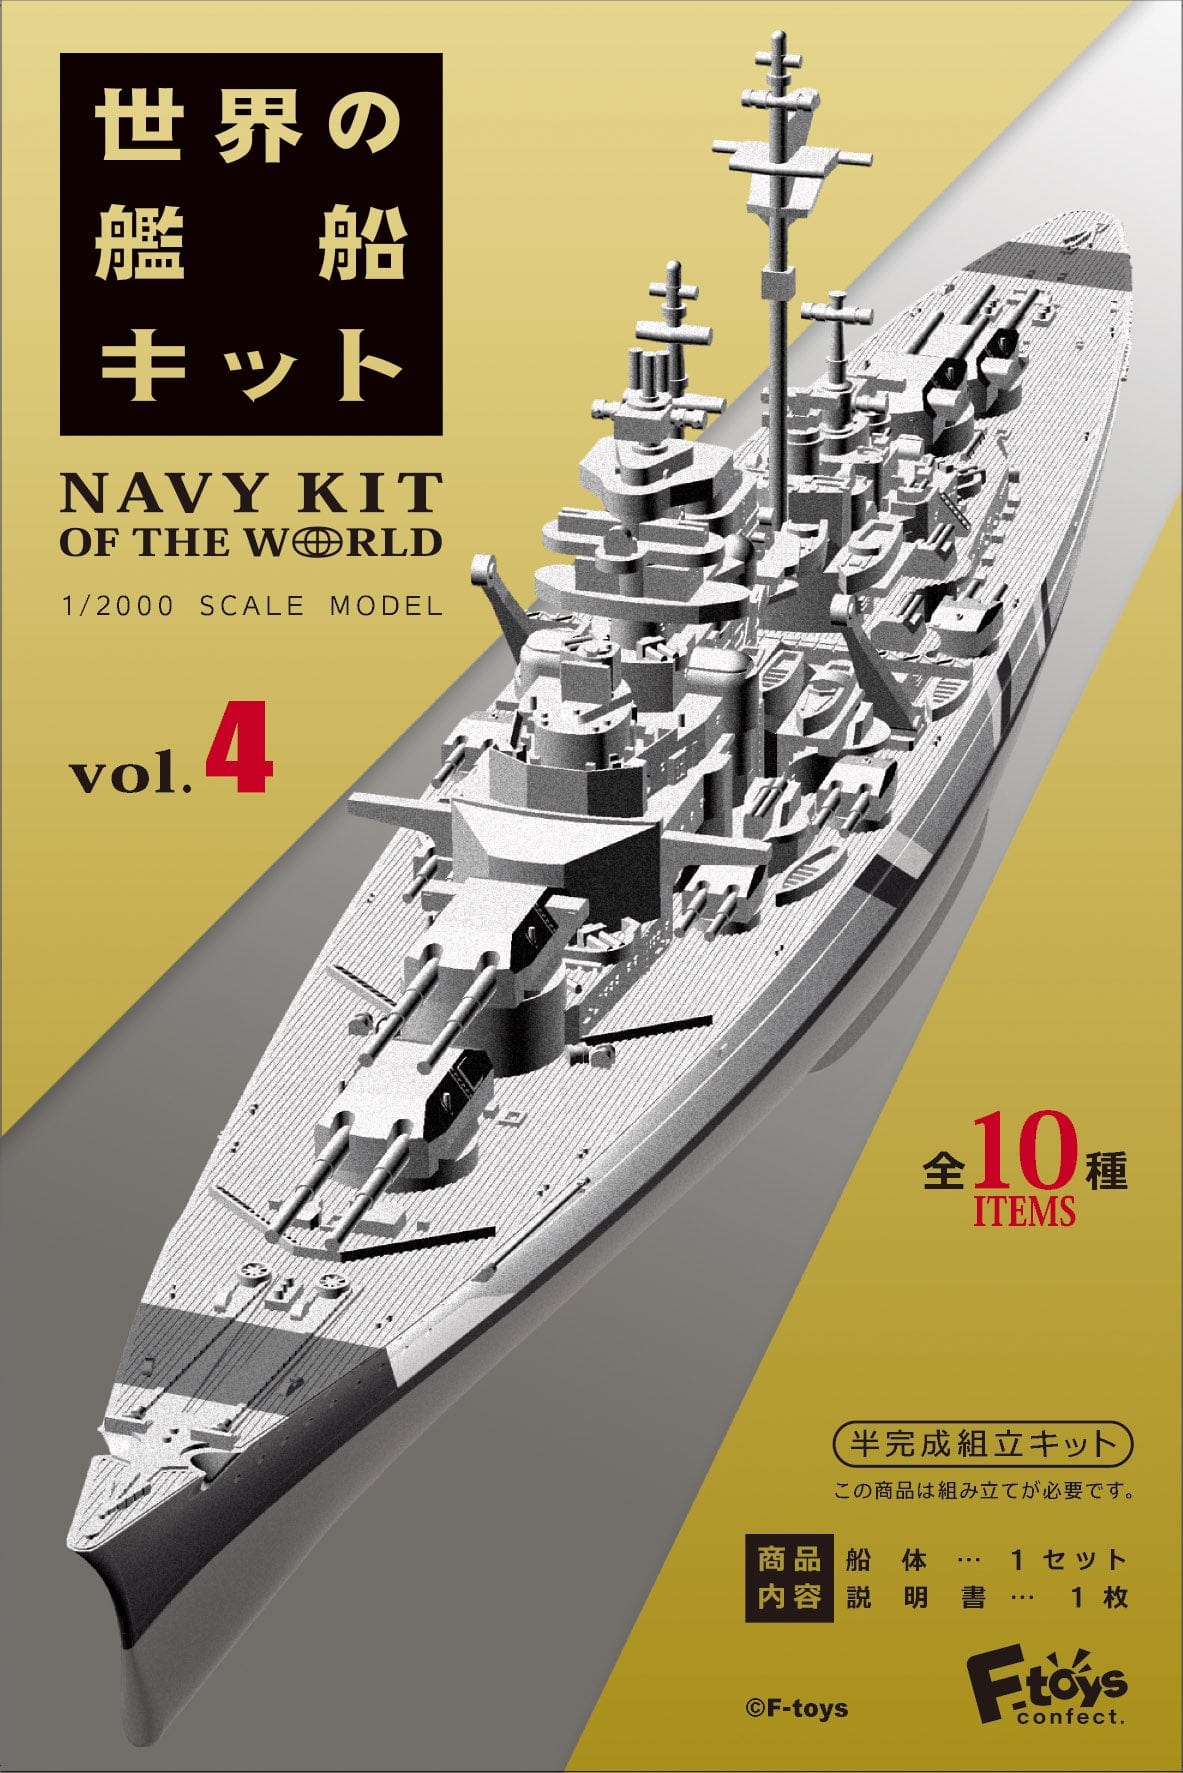 F-toys confect NAVY KIT OF THE WORLD 4